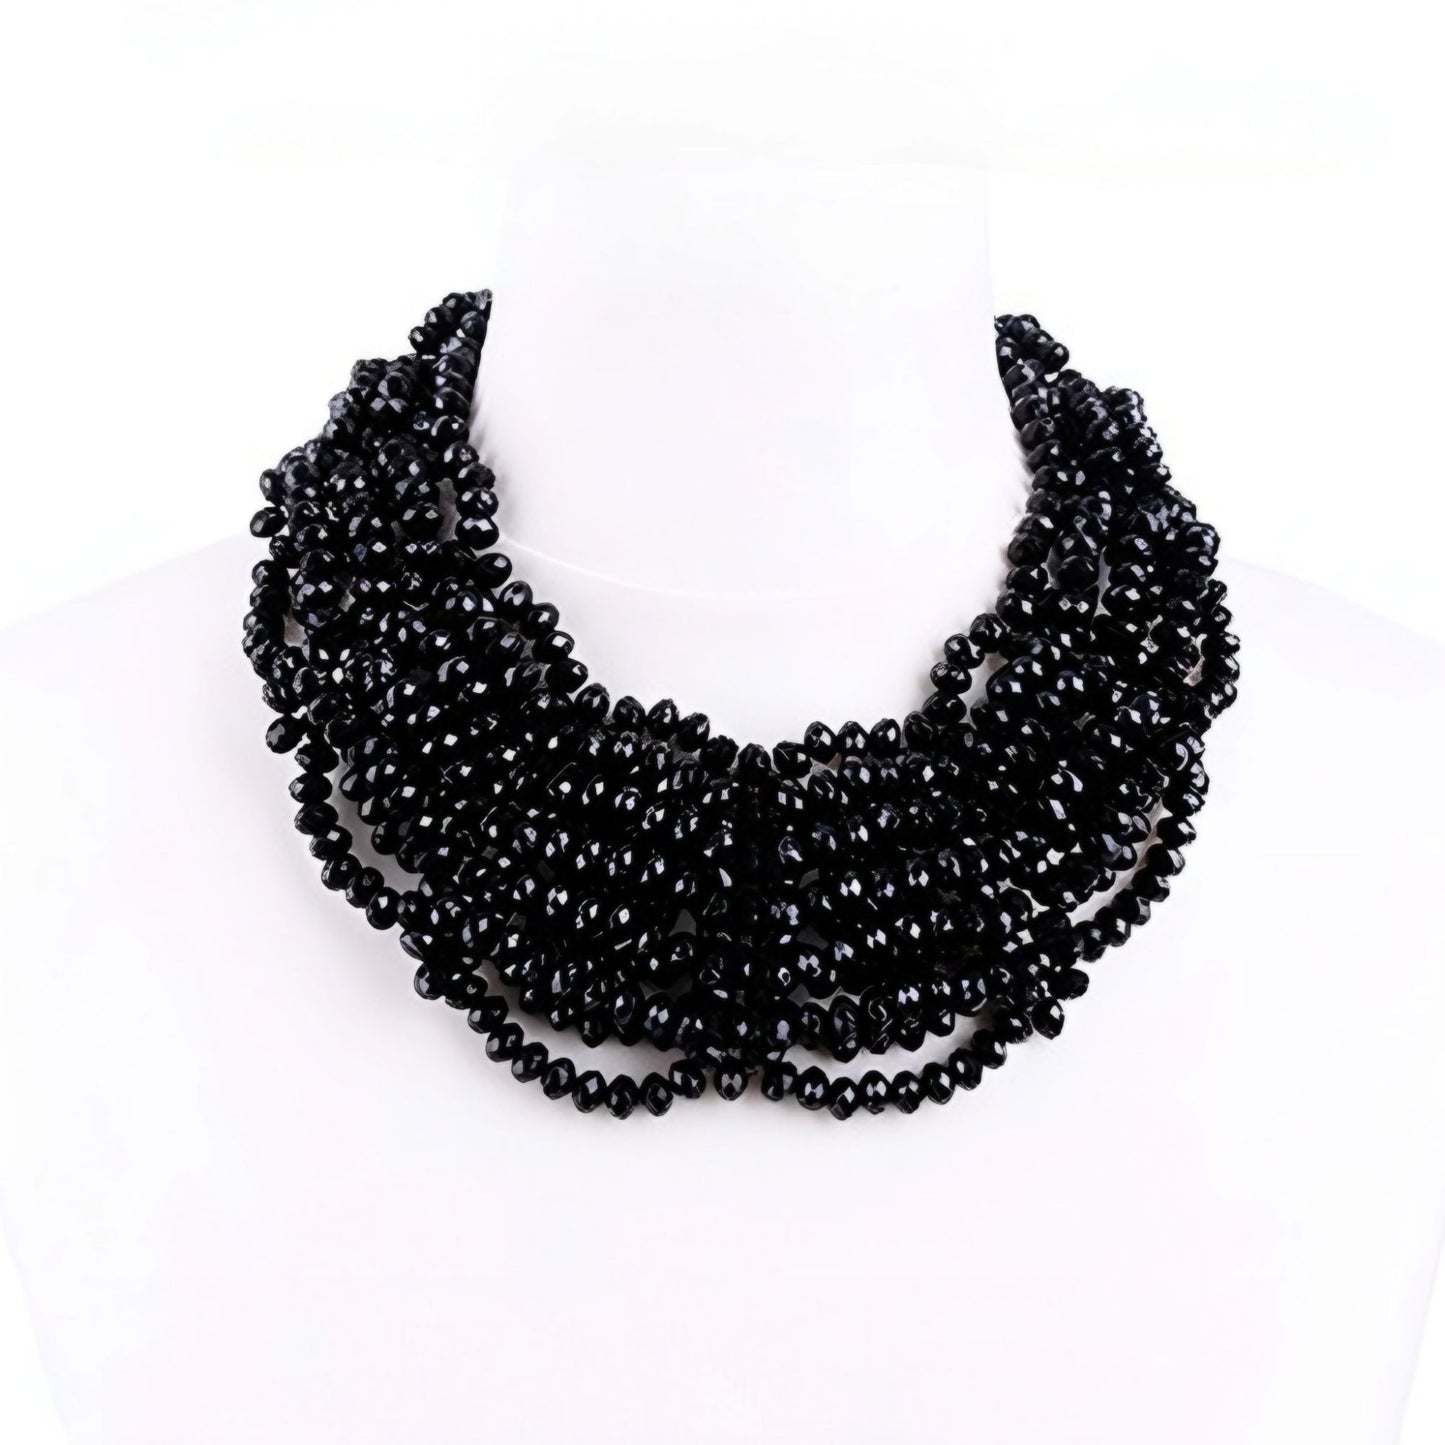 Multi-Strand Faceted Black Bead Necklace With Toggle Clasp